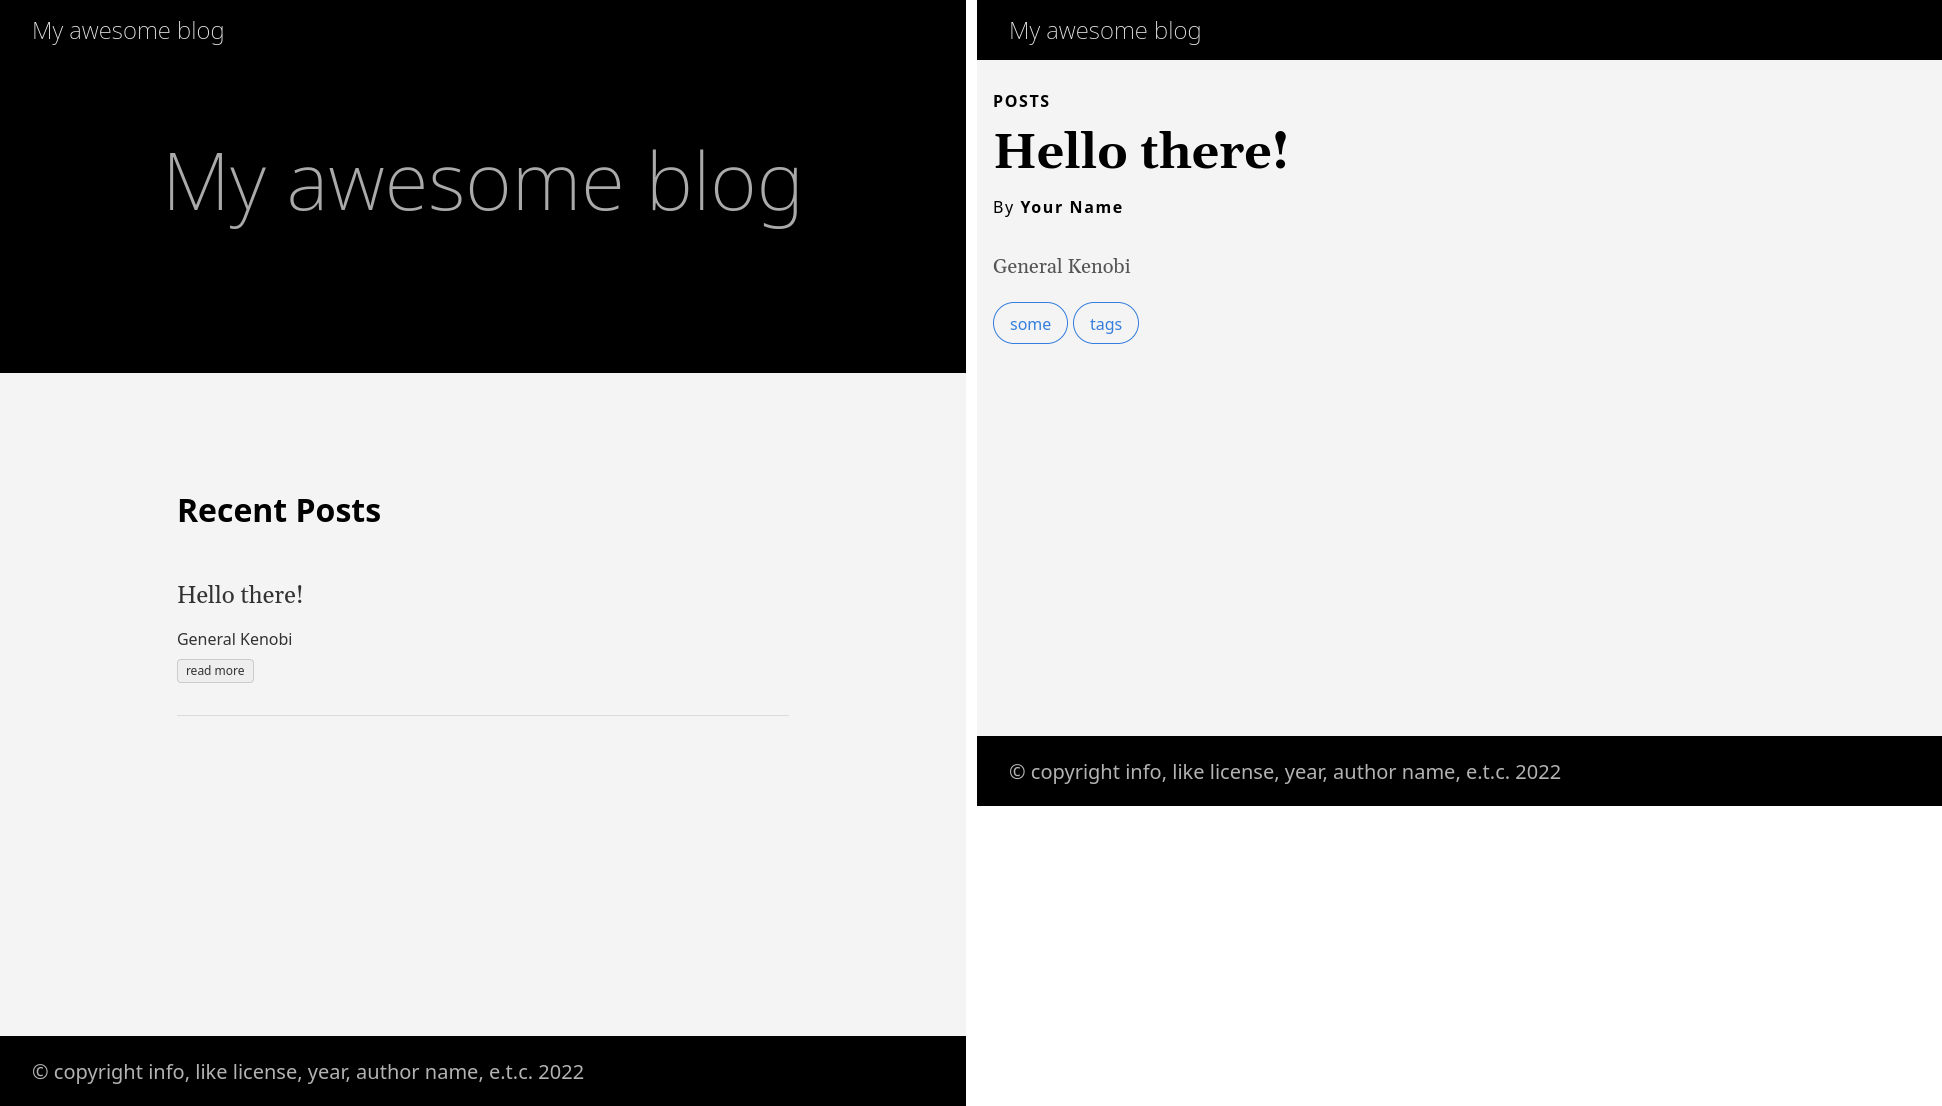 Figure 1: The blog homepage is on the left, and the post page is on the right